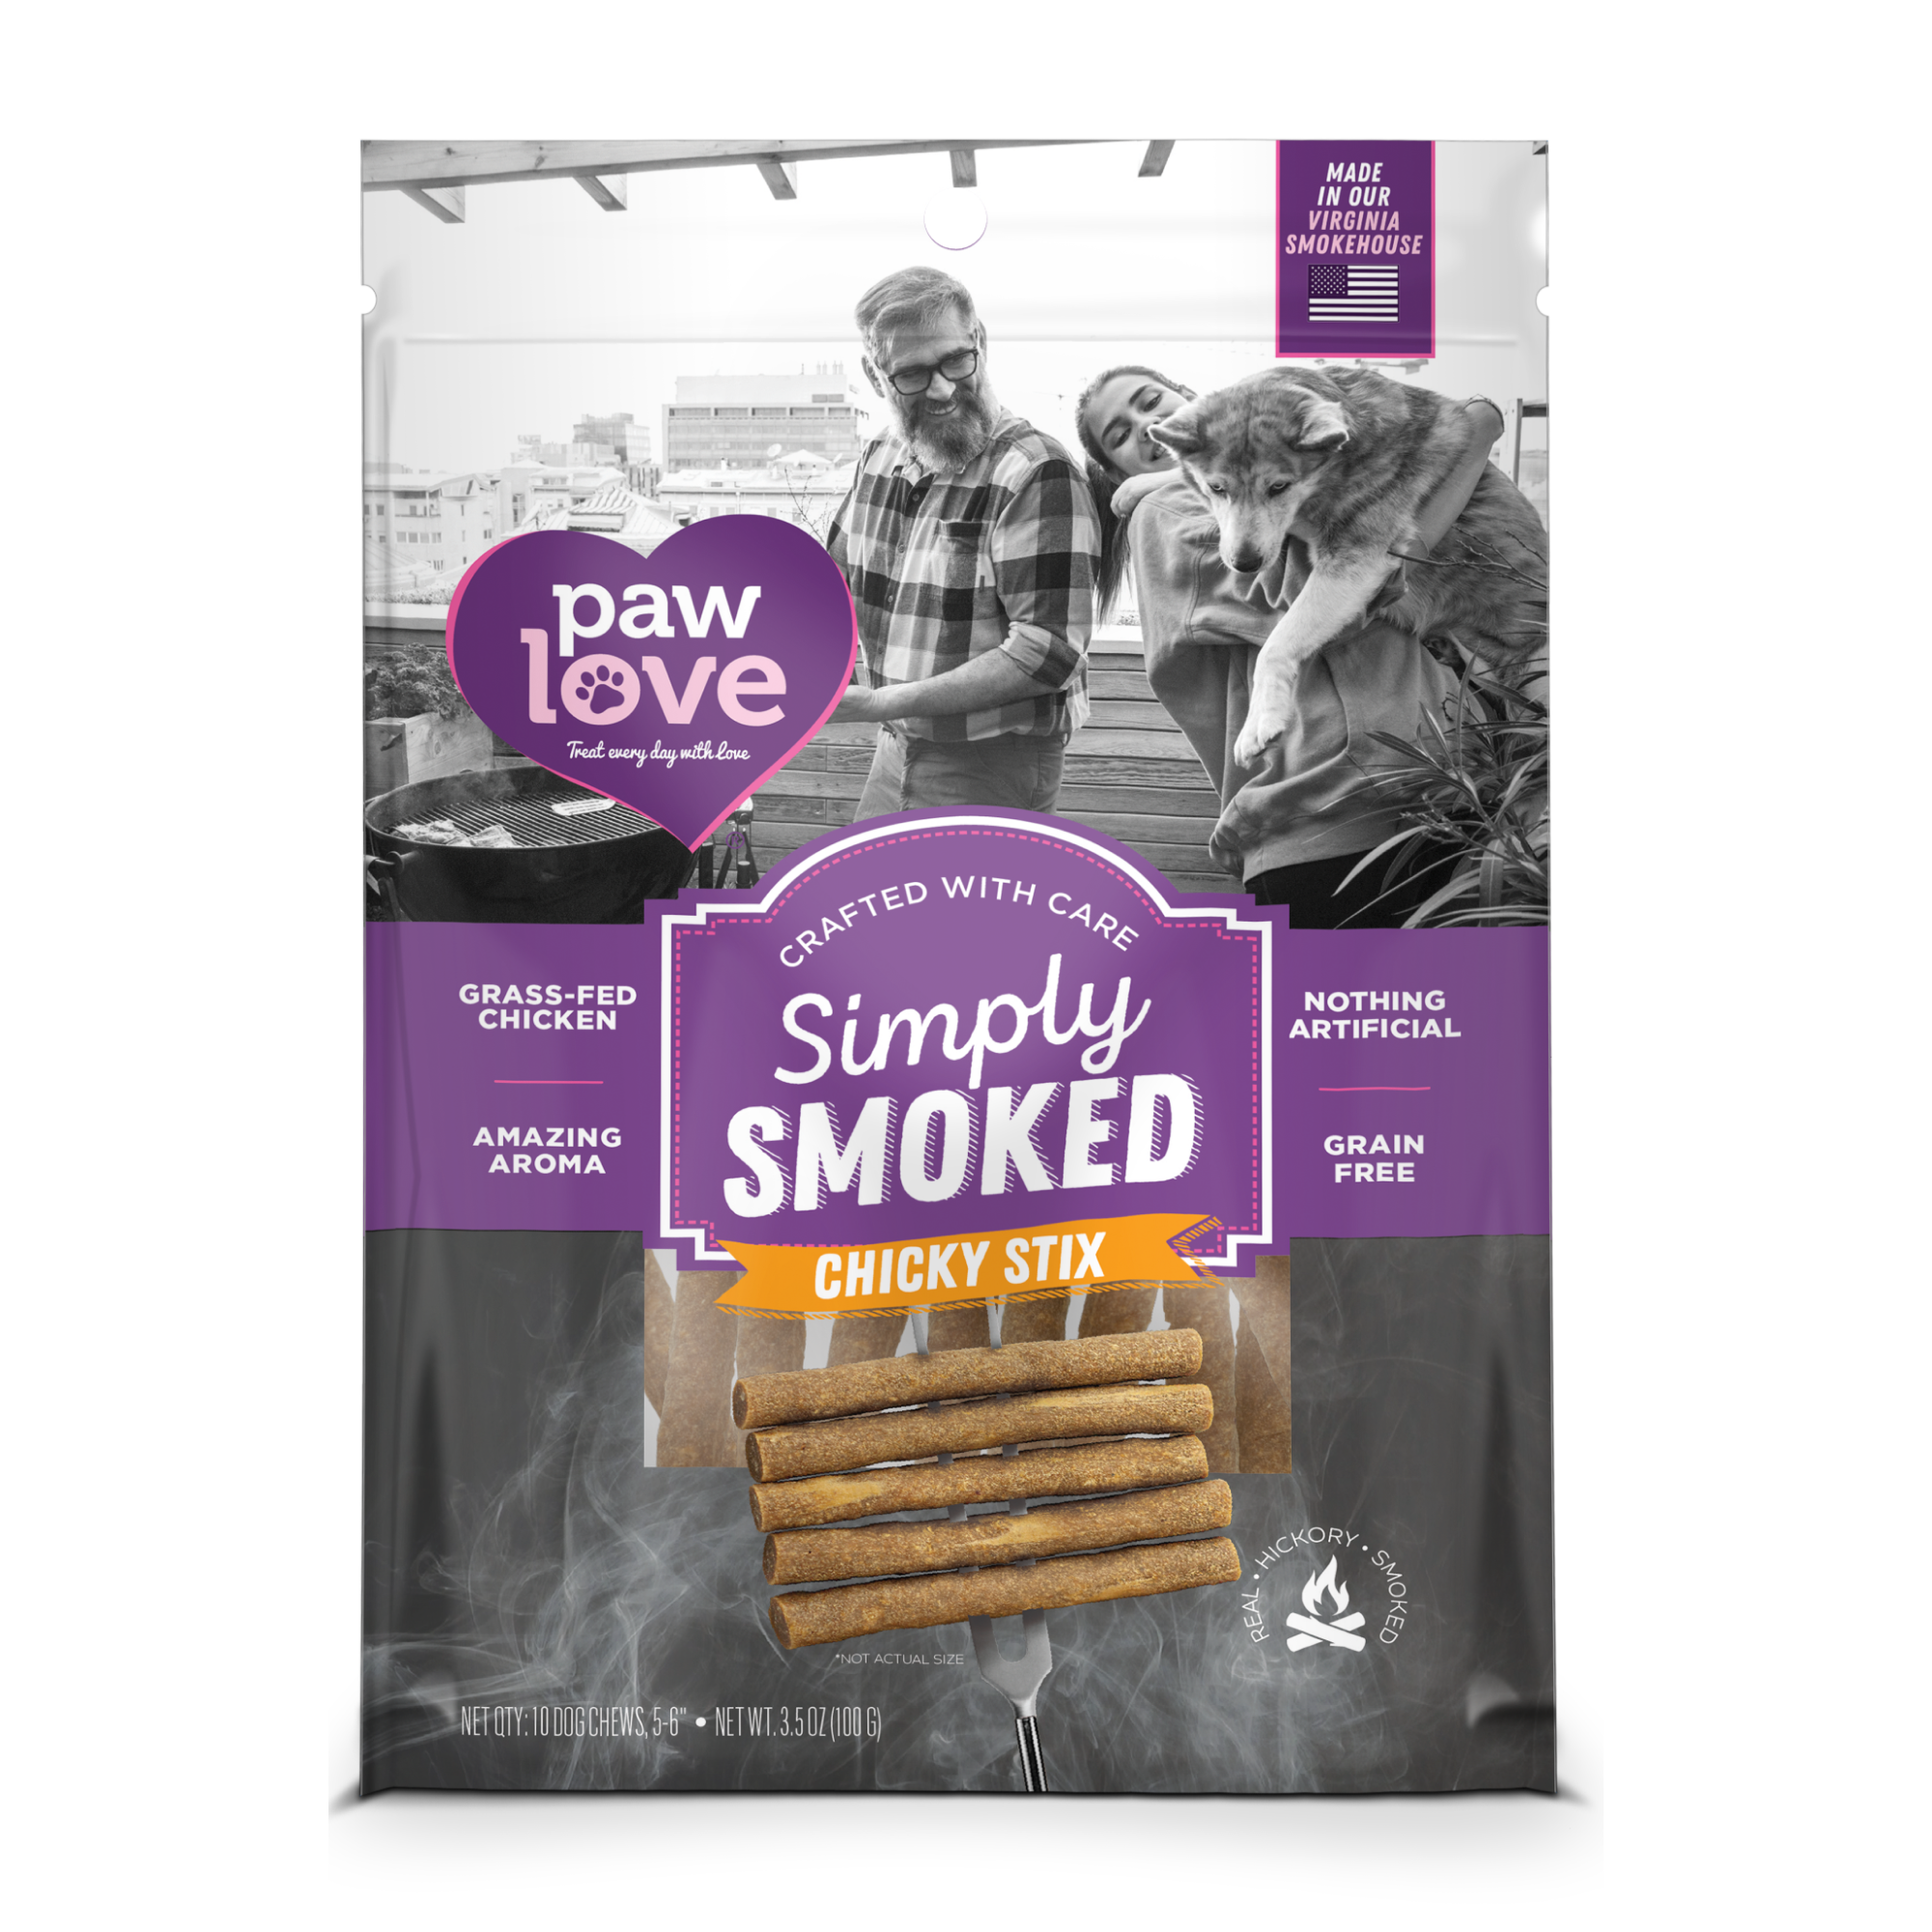 A black and white image of a package of "PW Simply Smoked Chicky Stix 10 Pack" dog treats, with a smiling man and woman feeding a dog in the background.